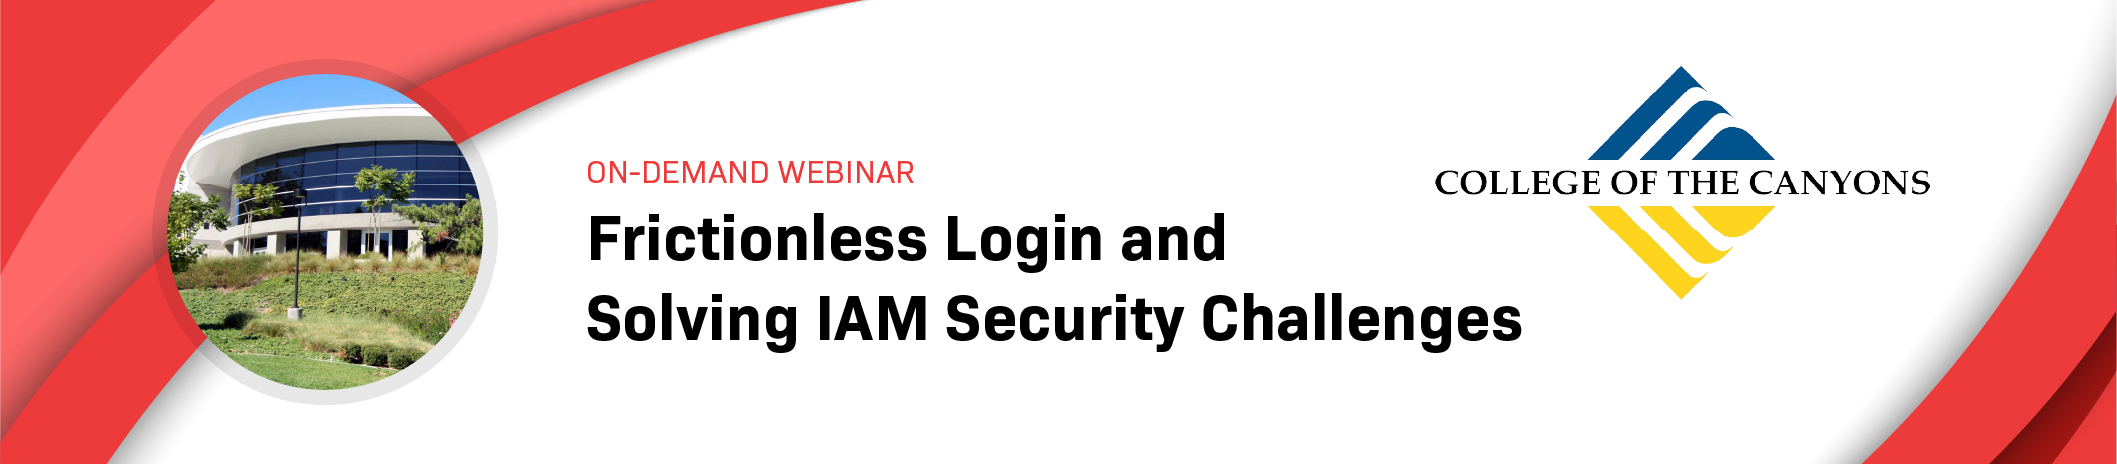 Frictionless Login & Solving IAM Security Challenges at the College of the Canyons